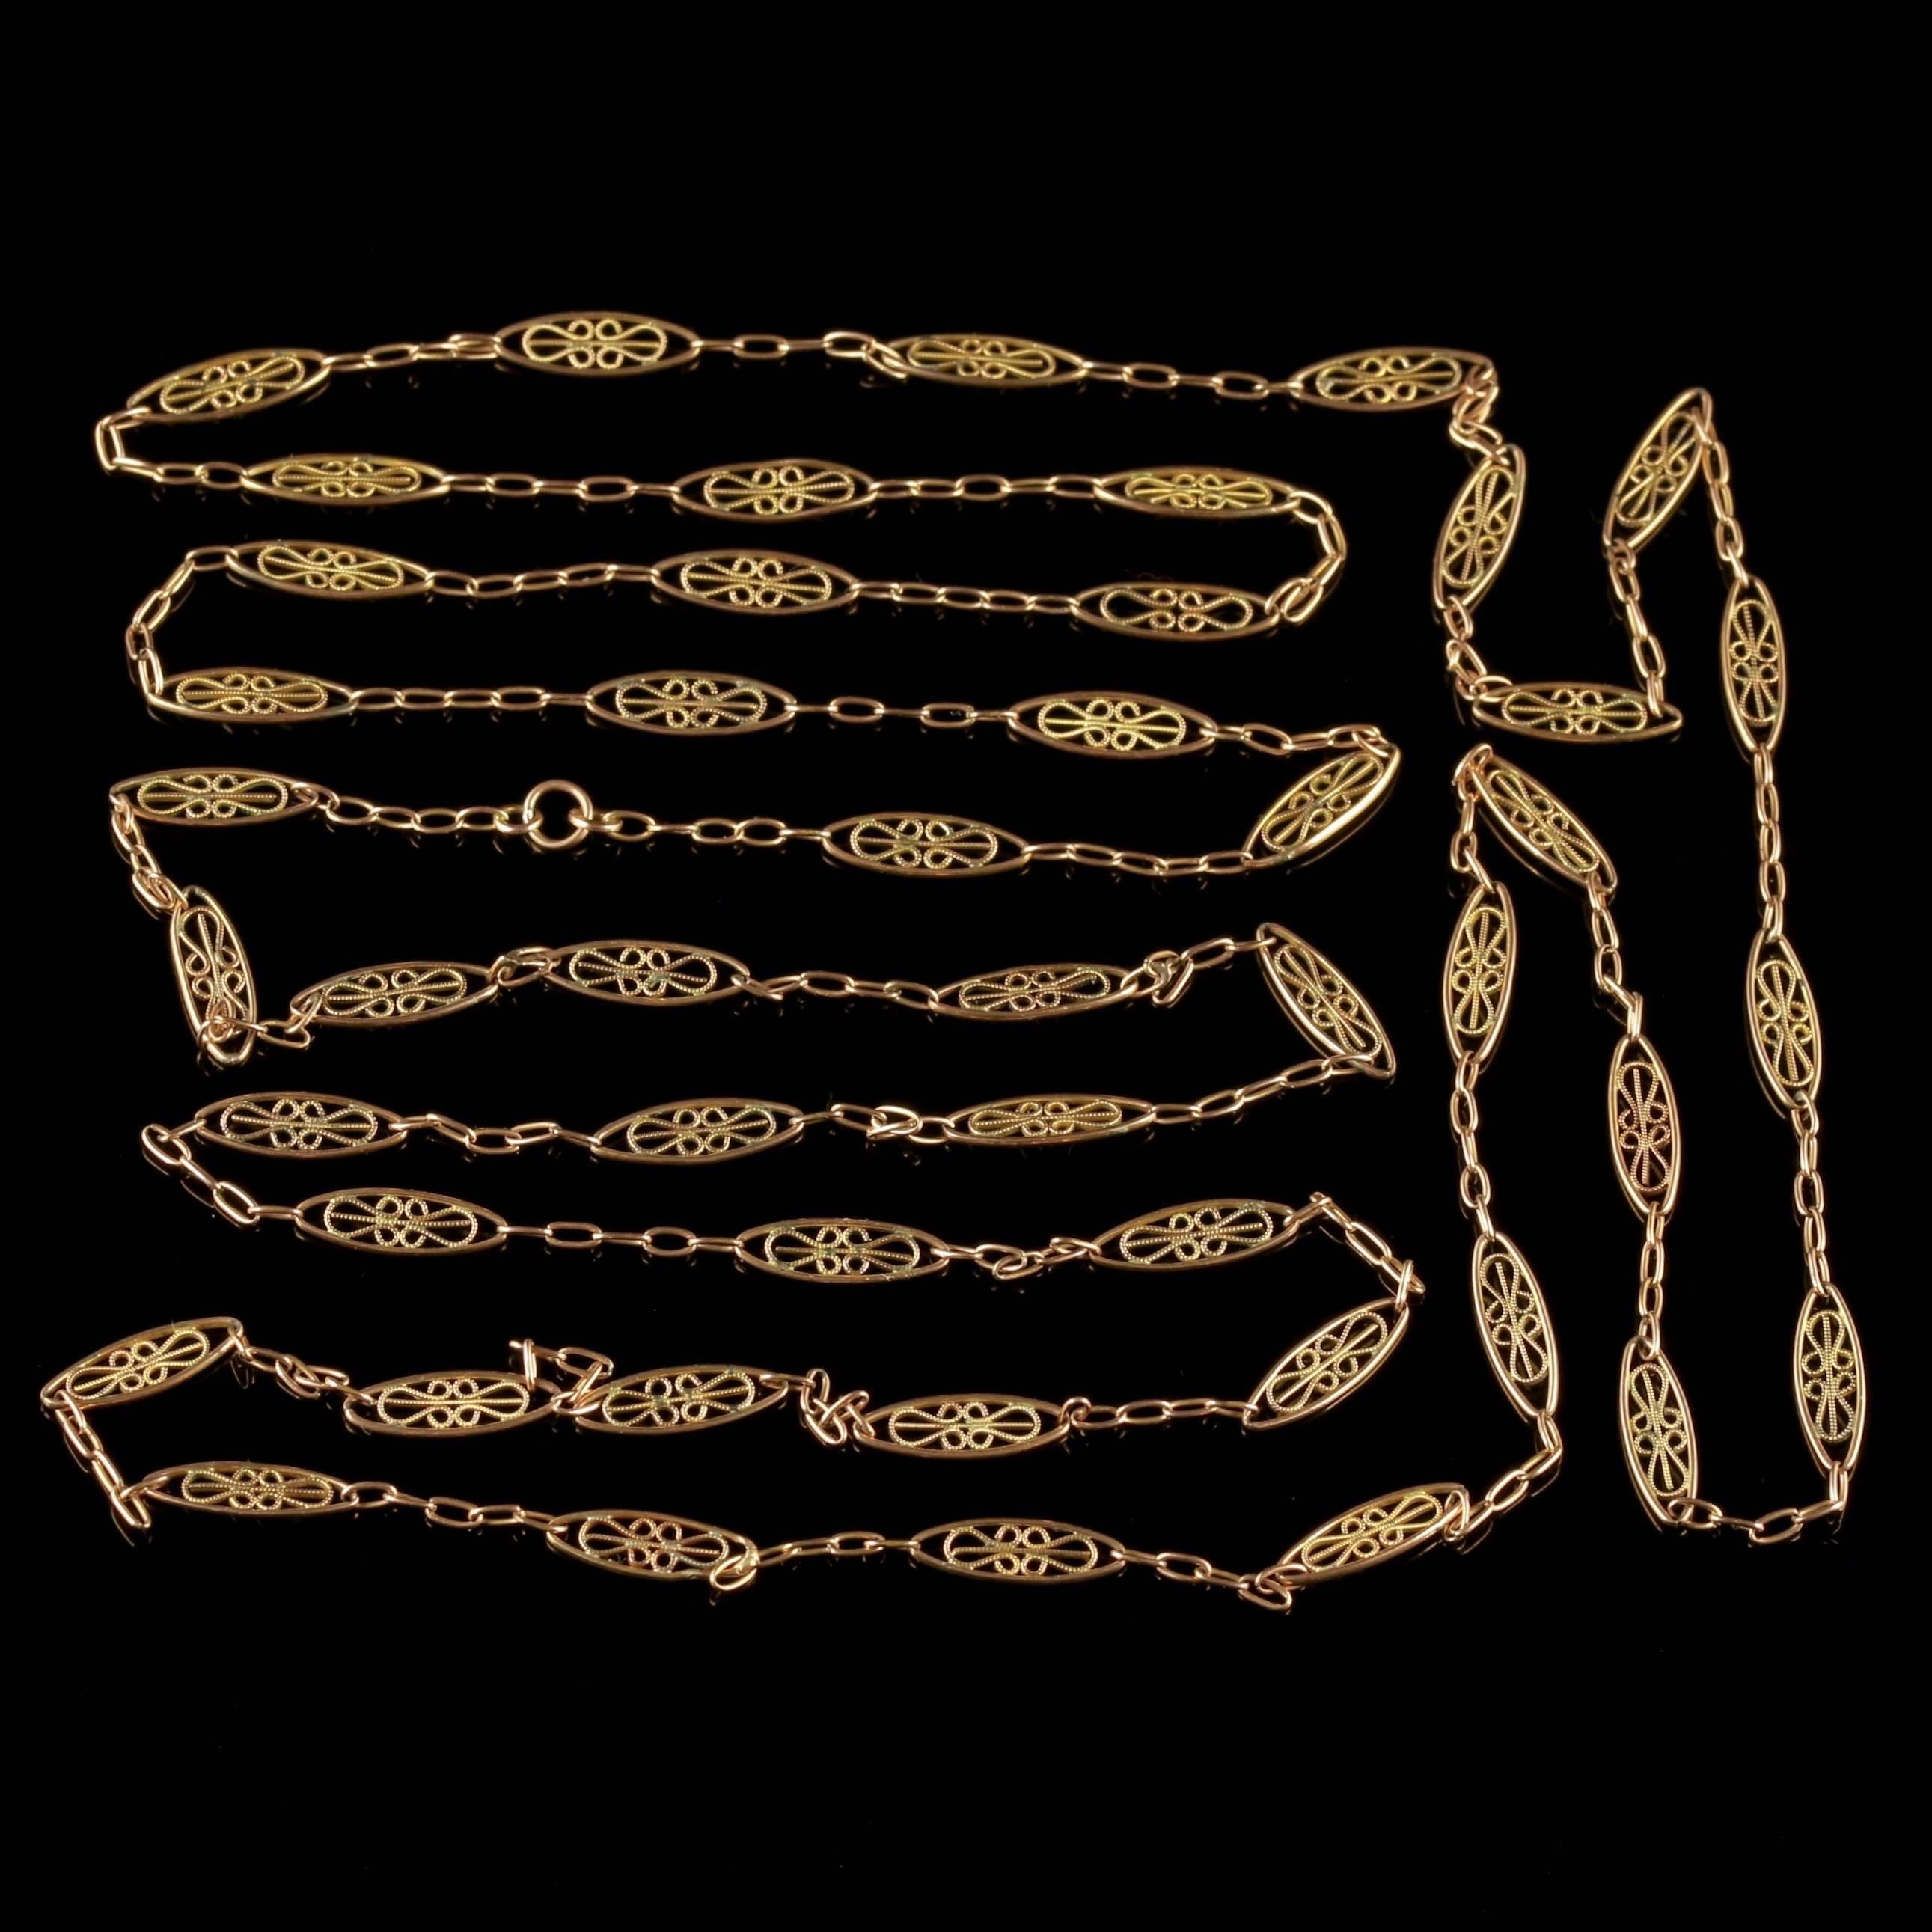 To read more please click continue reading below-

This fabulous long antique guard chain is Victorian, Circa 1900. 

The stunning chain is beautifully made displaying pristine workmanship all round. 

Made up of fancy Silver links gilded in 18ct